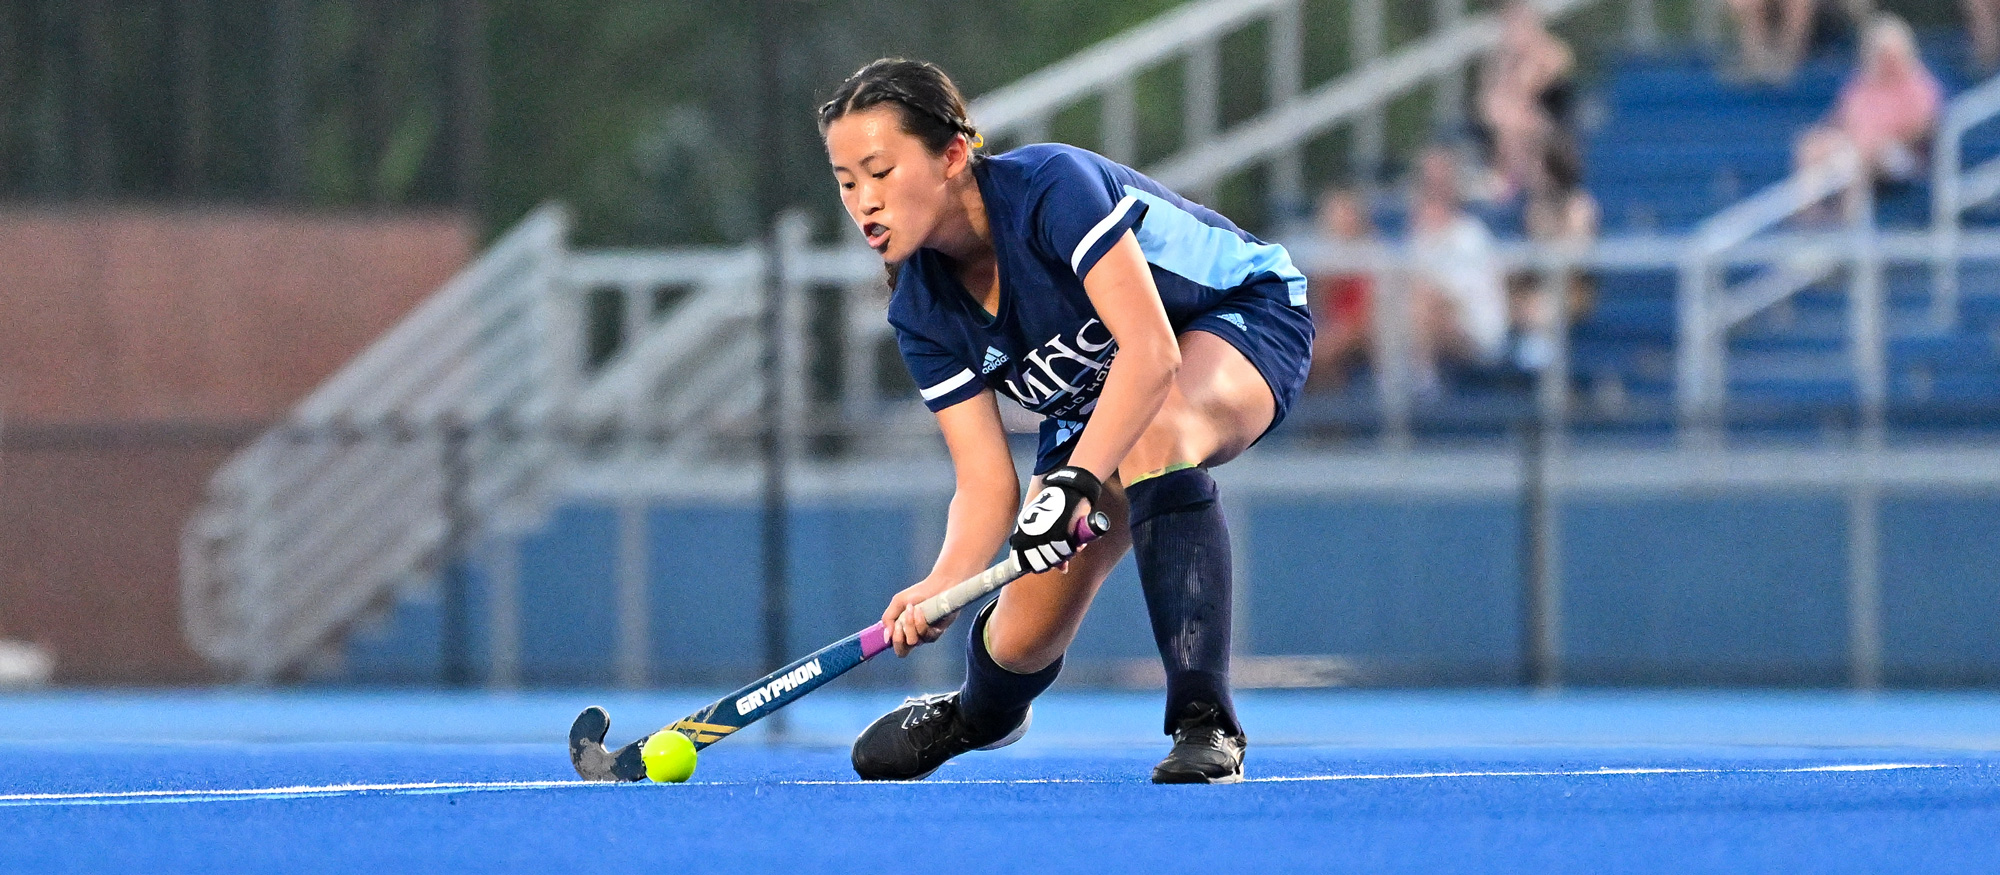 Anna Induni scored the lone goal of the game in a 1-0 win at Manhattanville College on Sept. 20, 2023. (RJB Sports file photo)